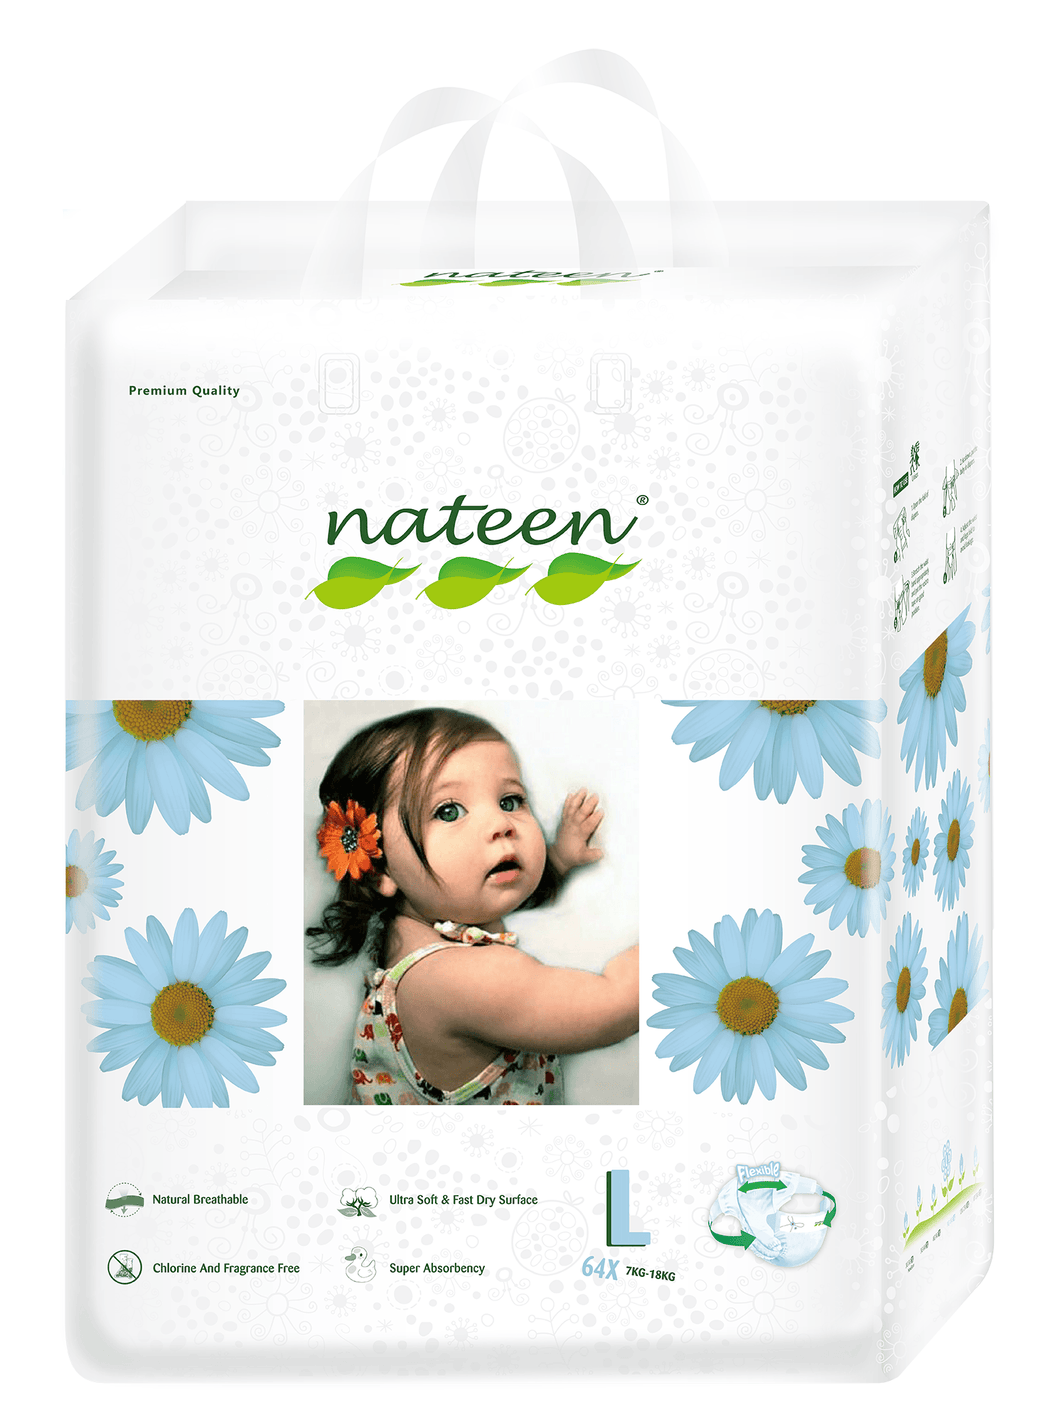 babywipes_nateen_canada_premium_diapers_biodegradable_sustainable_ecoliving_ecofriendly_toronto_size_large_64_units